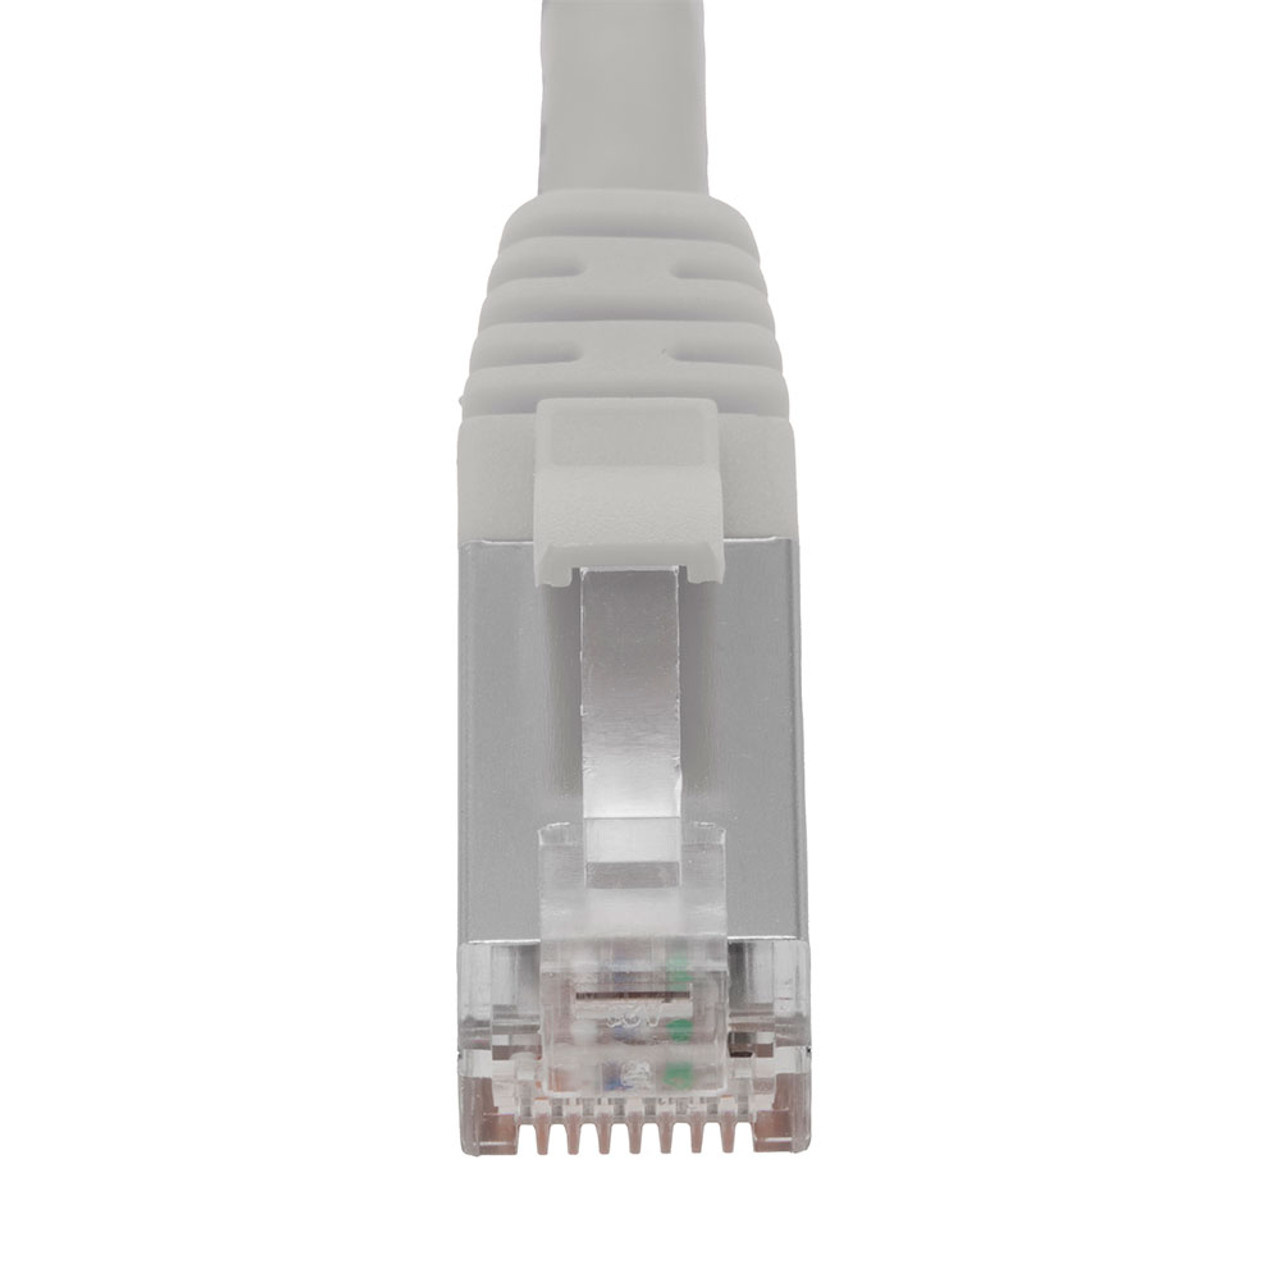 Ethernet Patch Cable CAT6, F/UTP, 26AWG,  5 Ft,  5 pack, Gray